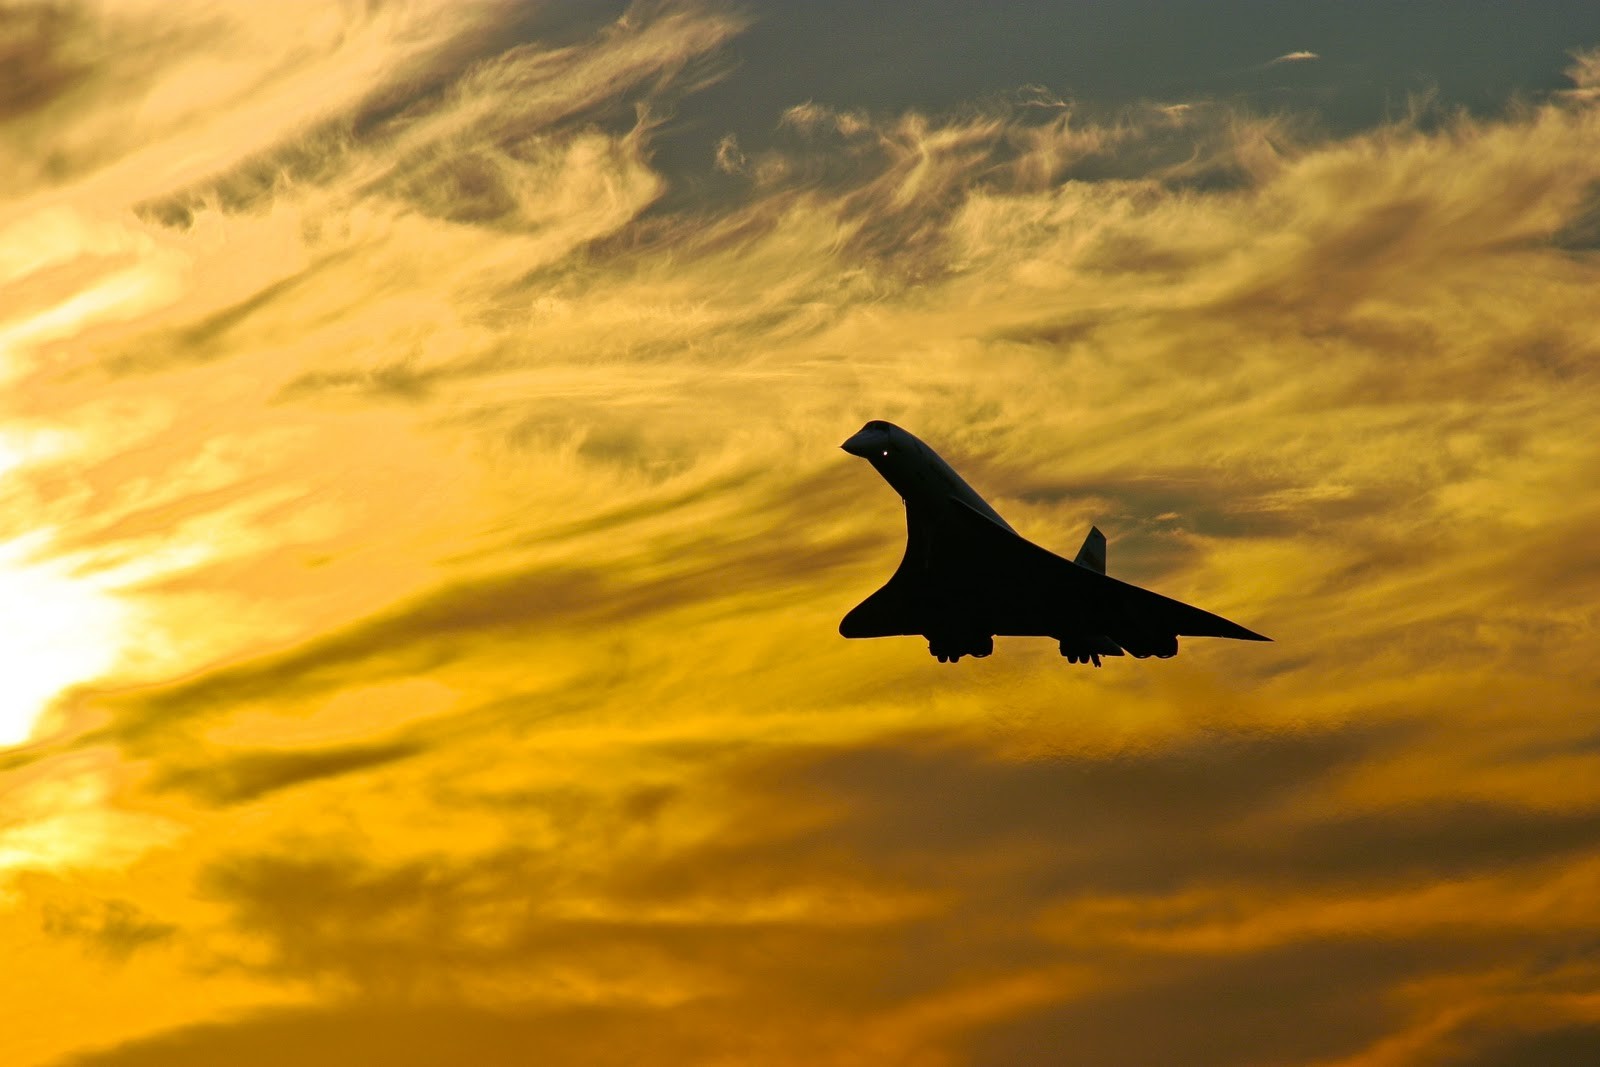 Concorde Aircraft Sky Jets Silhouette Clouds Flying Photography Sunlight 1600x1067